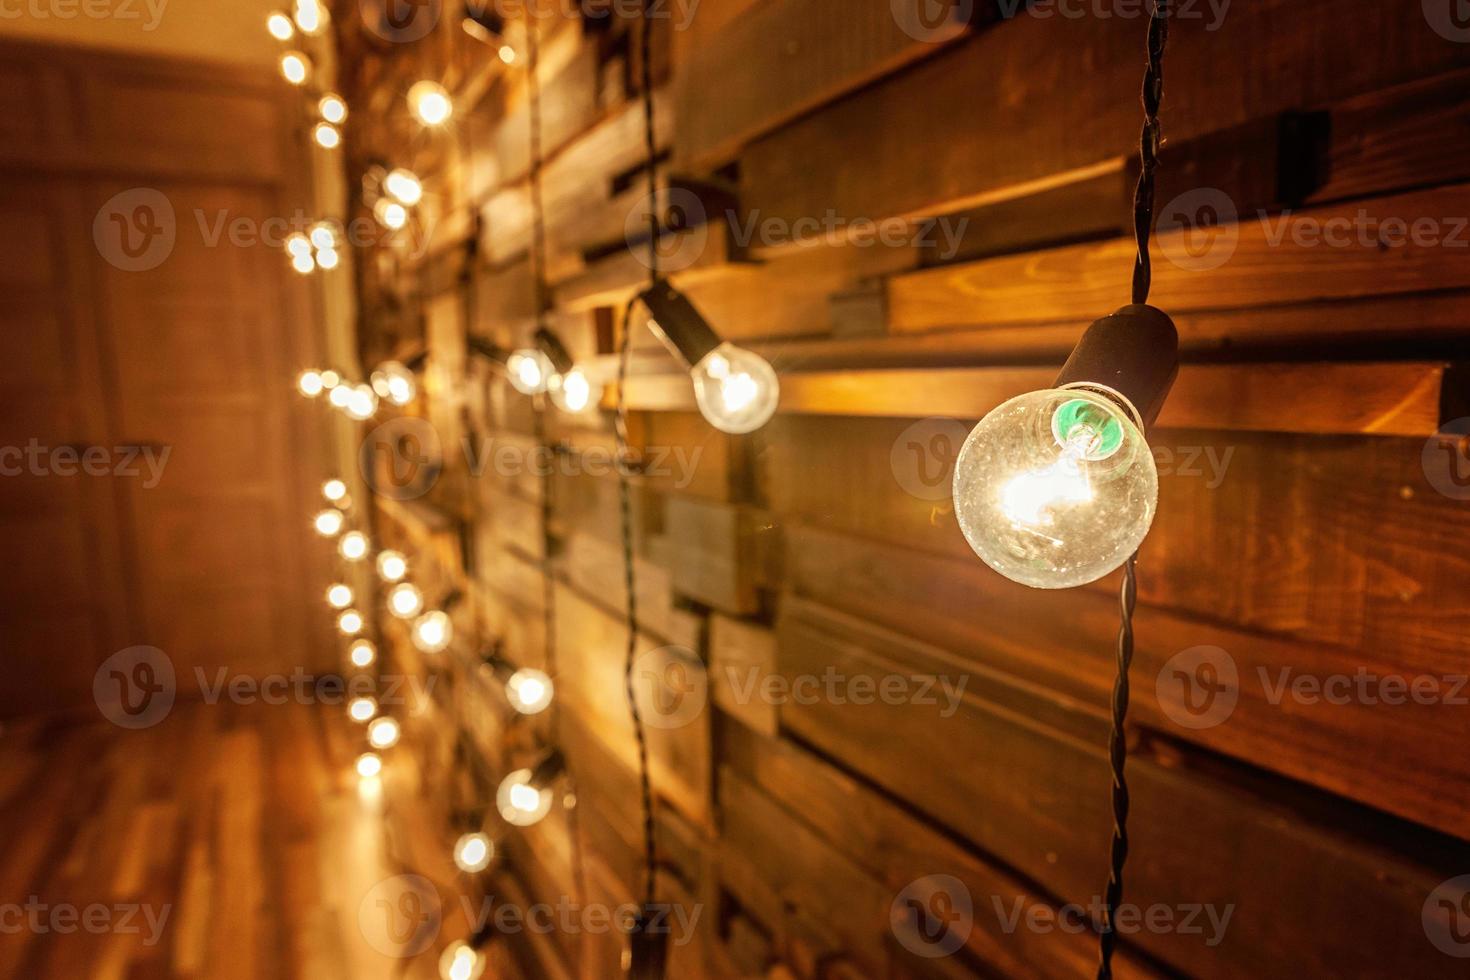 Modern dark classical style interior design apartment with retro lamps hanging light bulbs background. Wooden planks with lamps. Decorated interior room with gold lights. Copy space mockup poster. photo